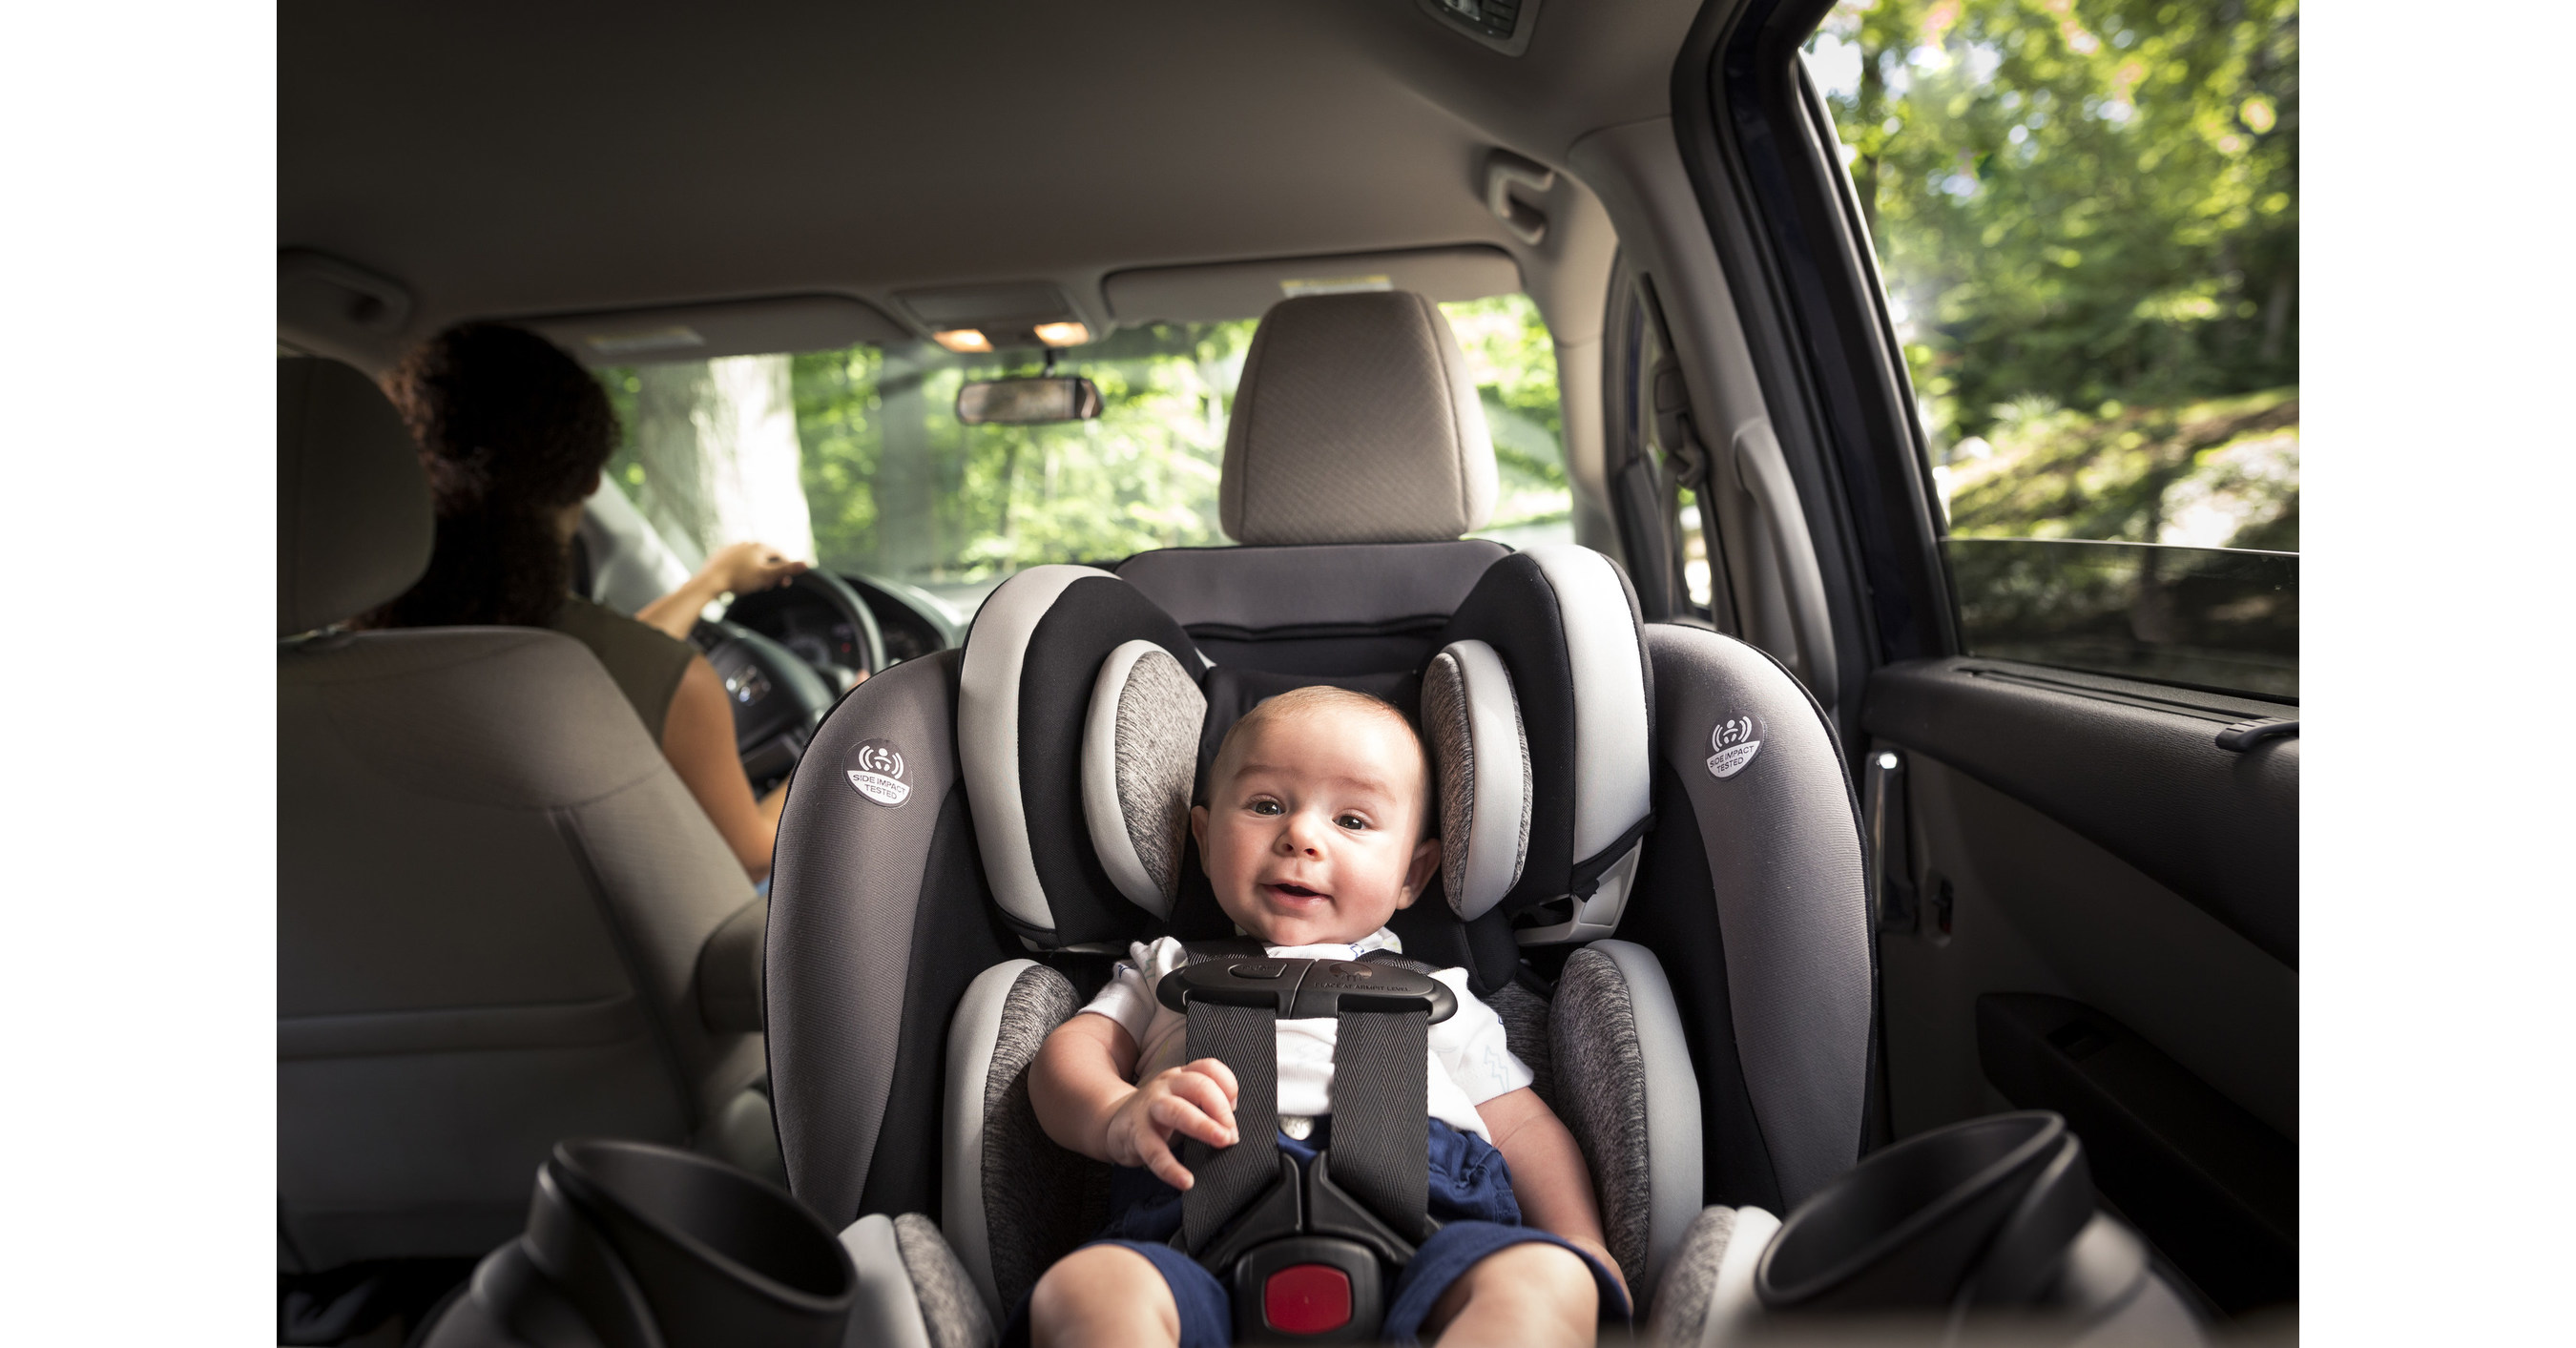 Replace Your Child Safety Seat After A Crash To Ensure Children Are Protected On The Road - Joie Car Seat Replacement After Accident